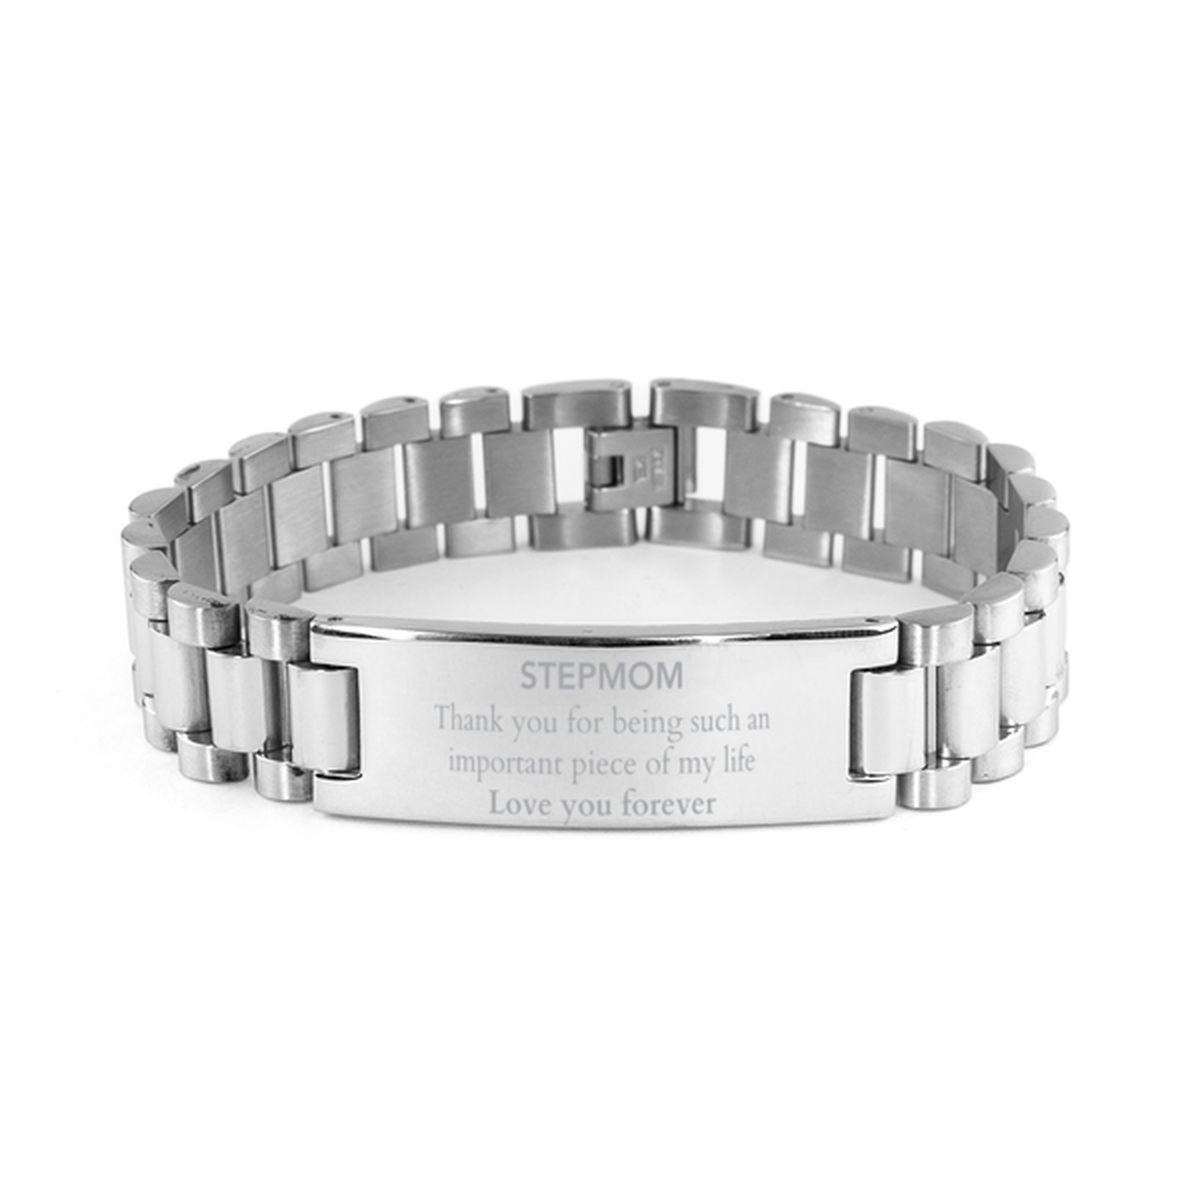 Appropriate Stepmom Ladder Stainless Steel Bracelet Epic Birthday Gifts for Stepmom Thank you for being such an important piece of my life Stepmom Christmas Mothers Fathers Day